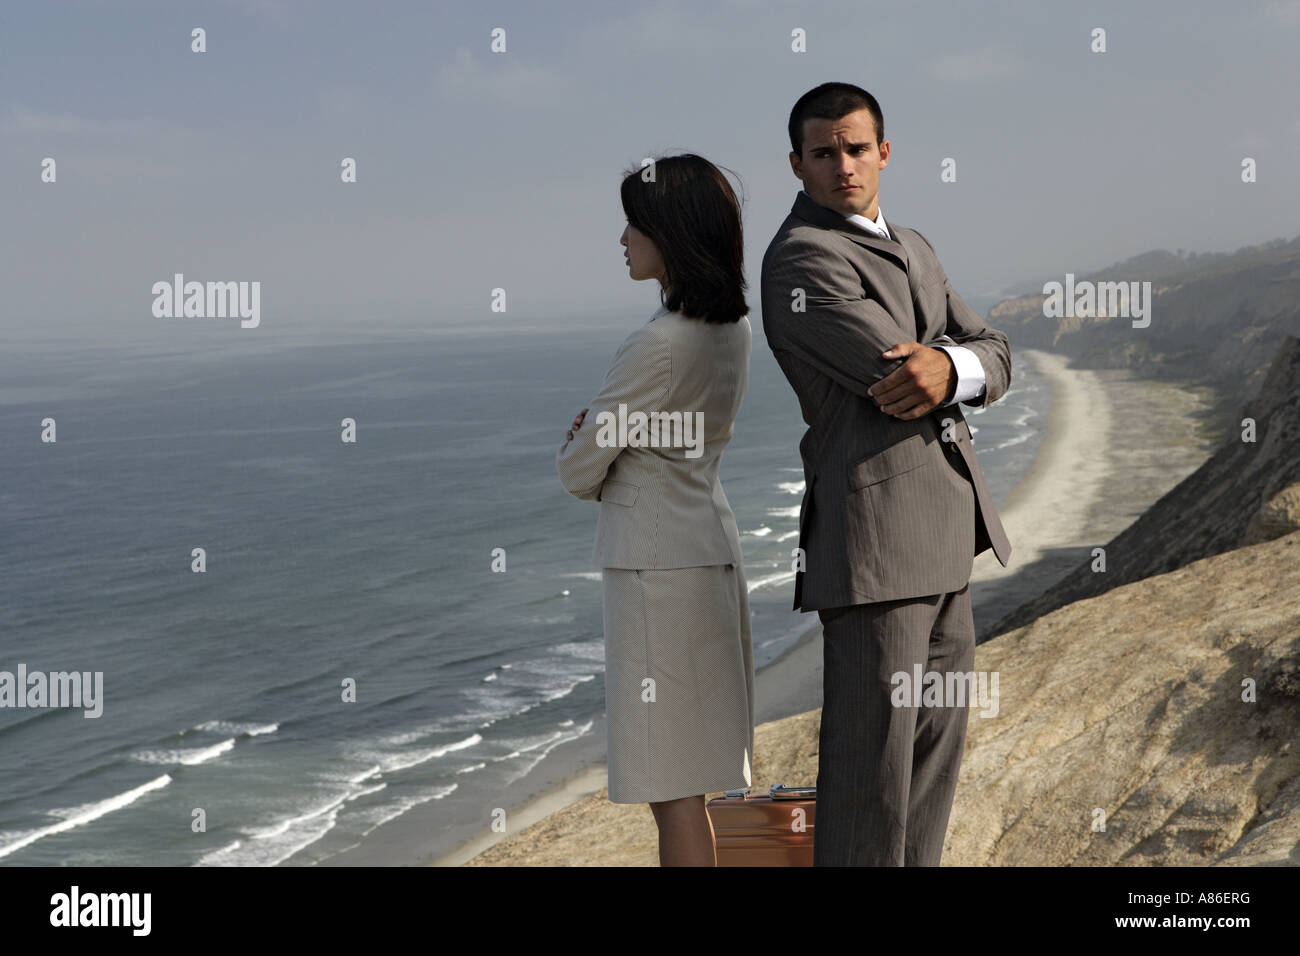 View of a man and a woman standing on a cliff. Stock Photo